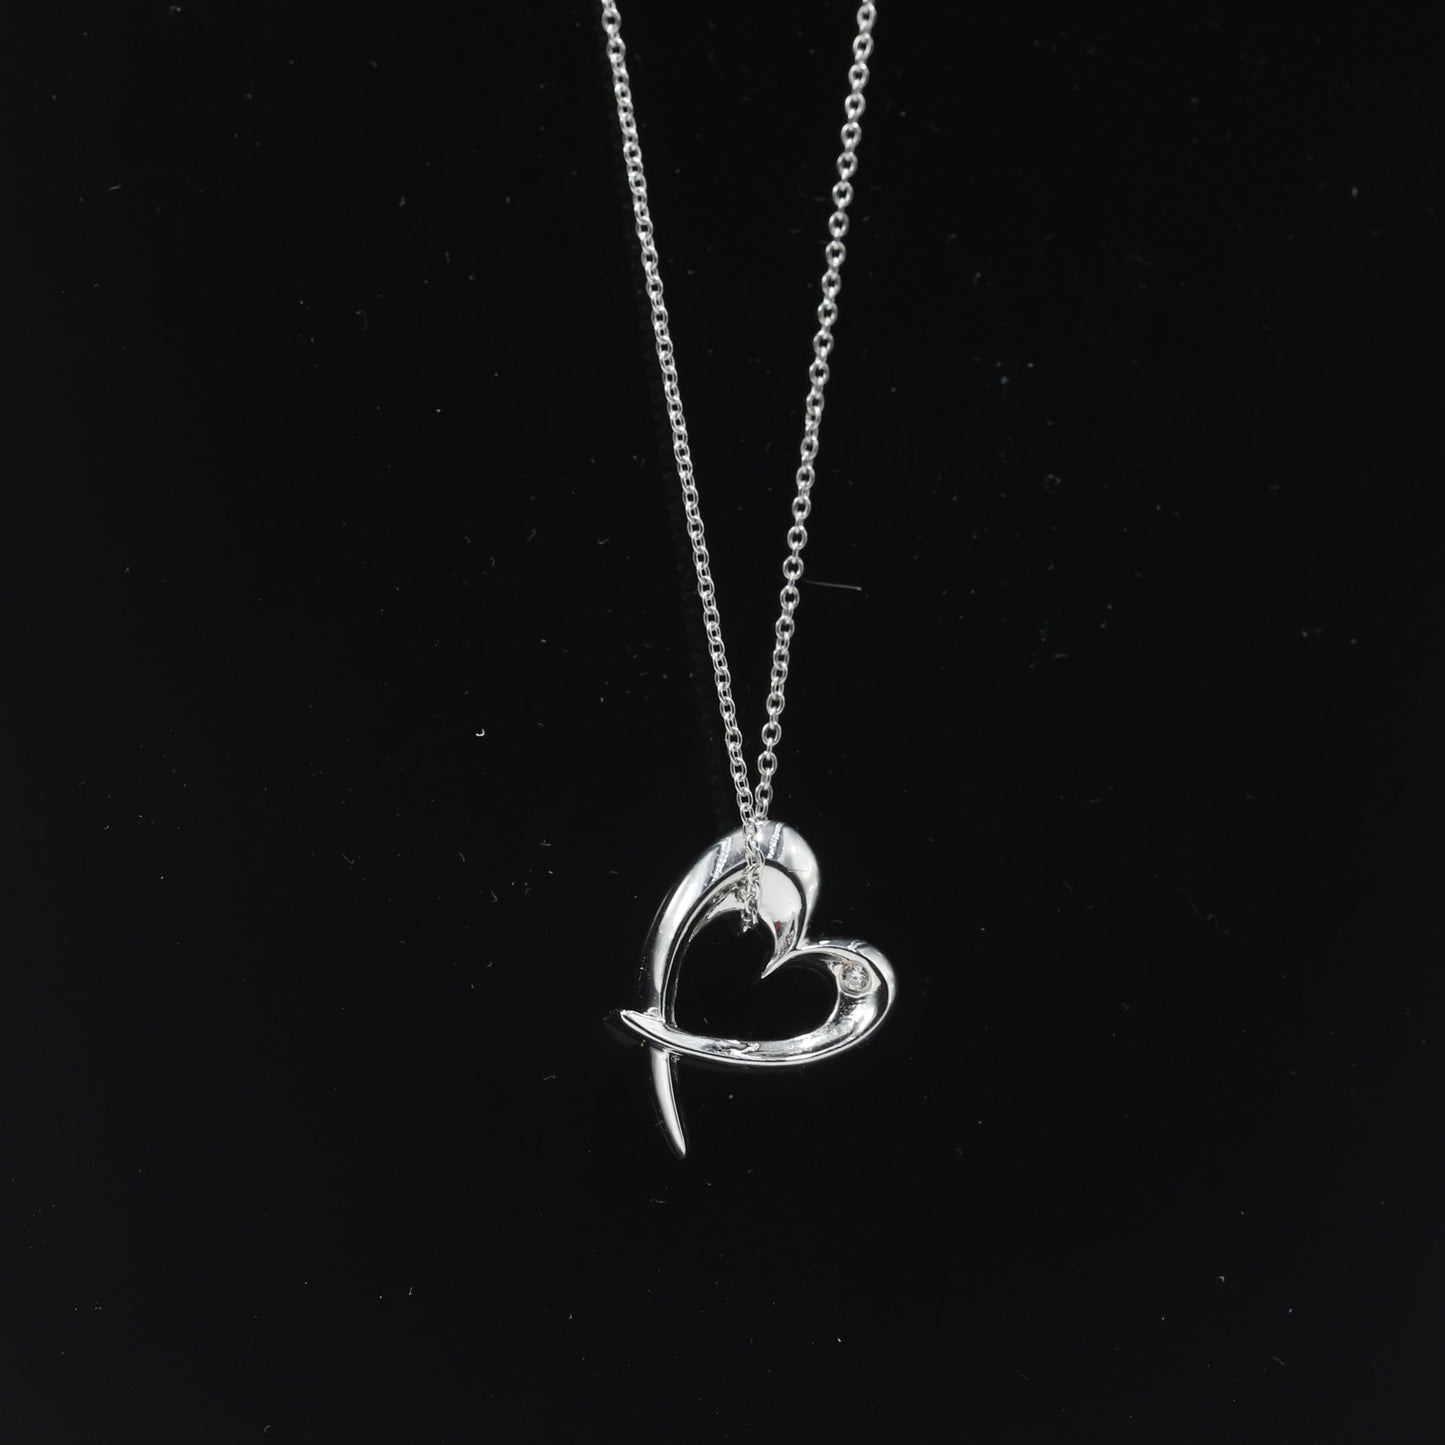 TILTED HEART NECKLACE - STERLING SILVER